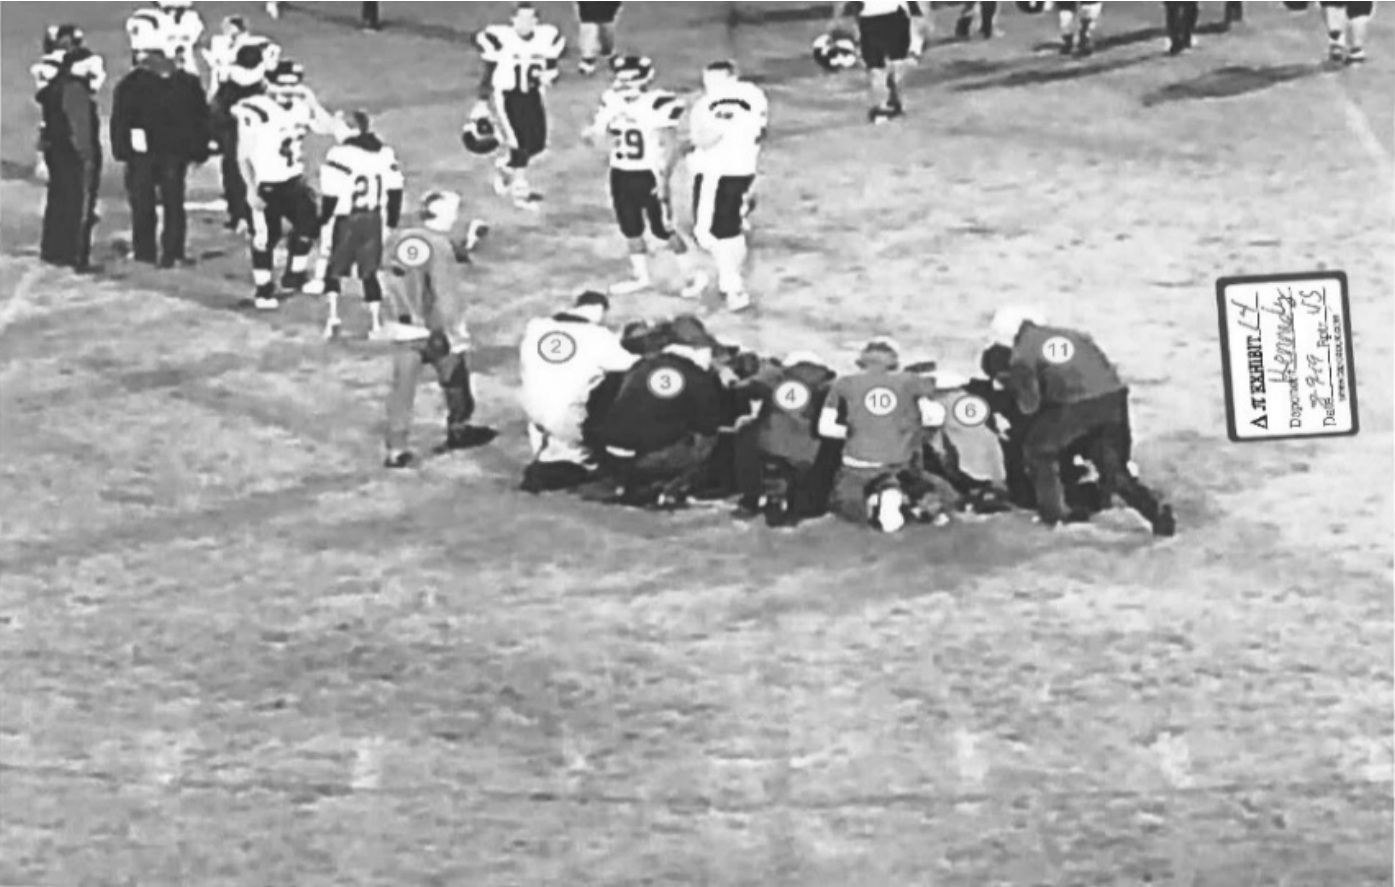 Football players in prayer circle with identification markers on backs